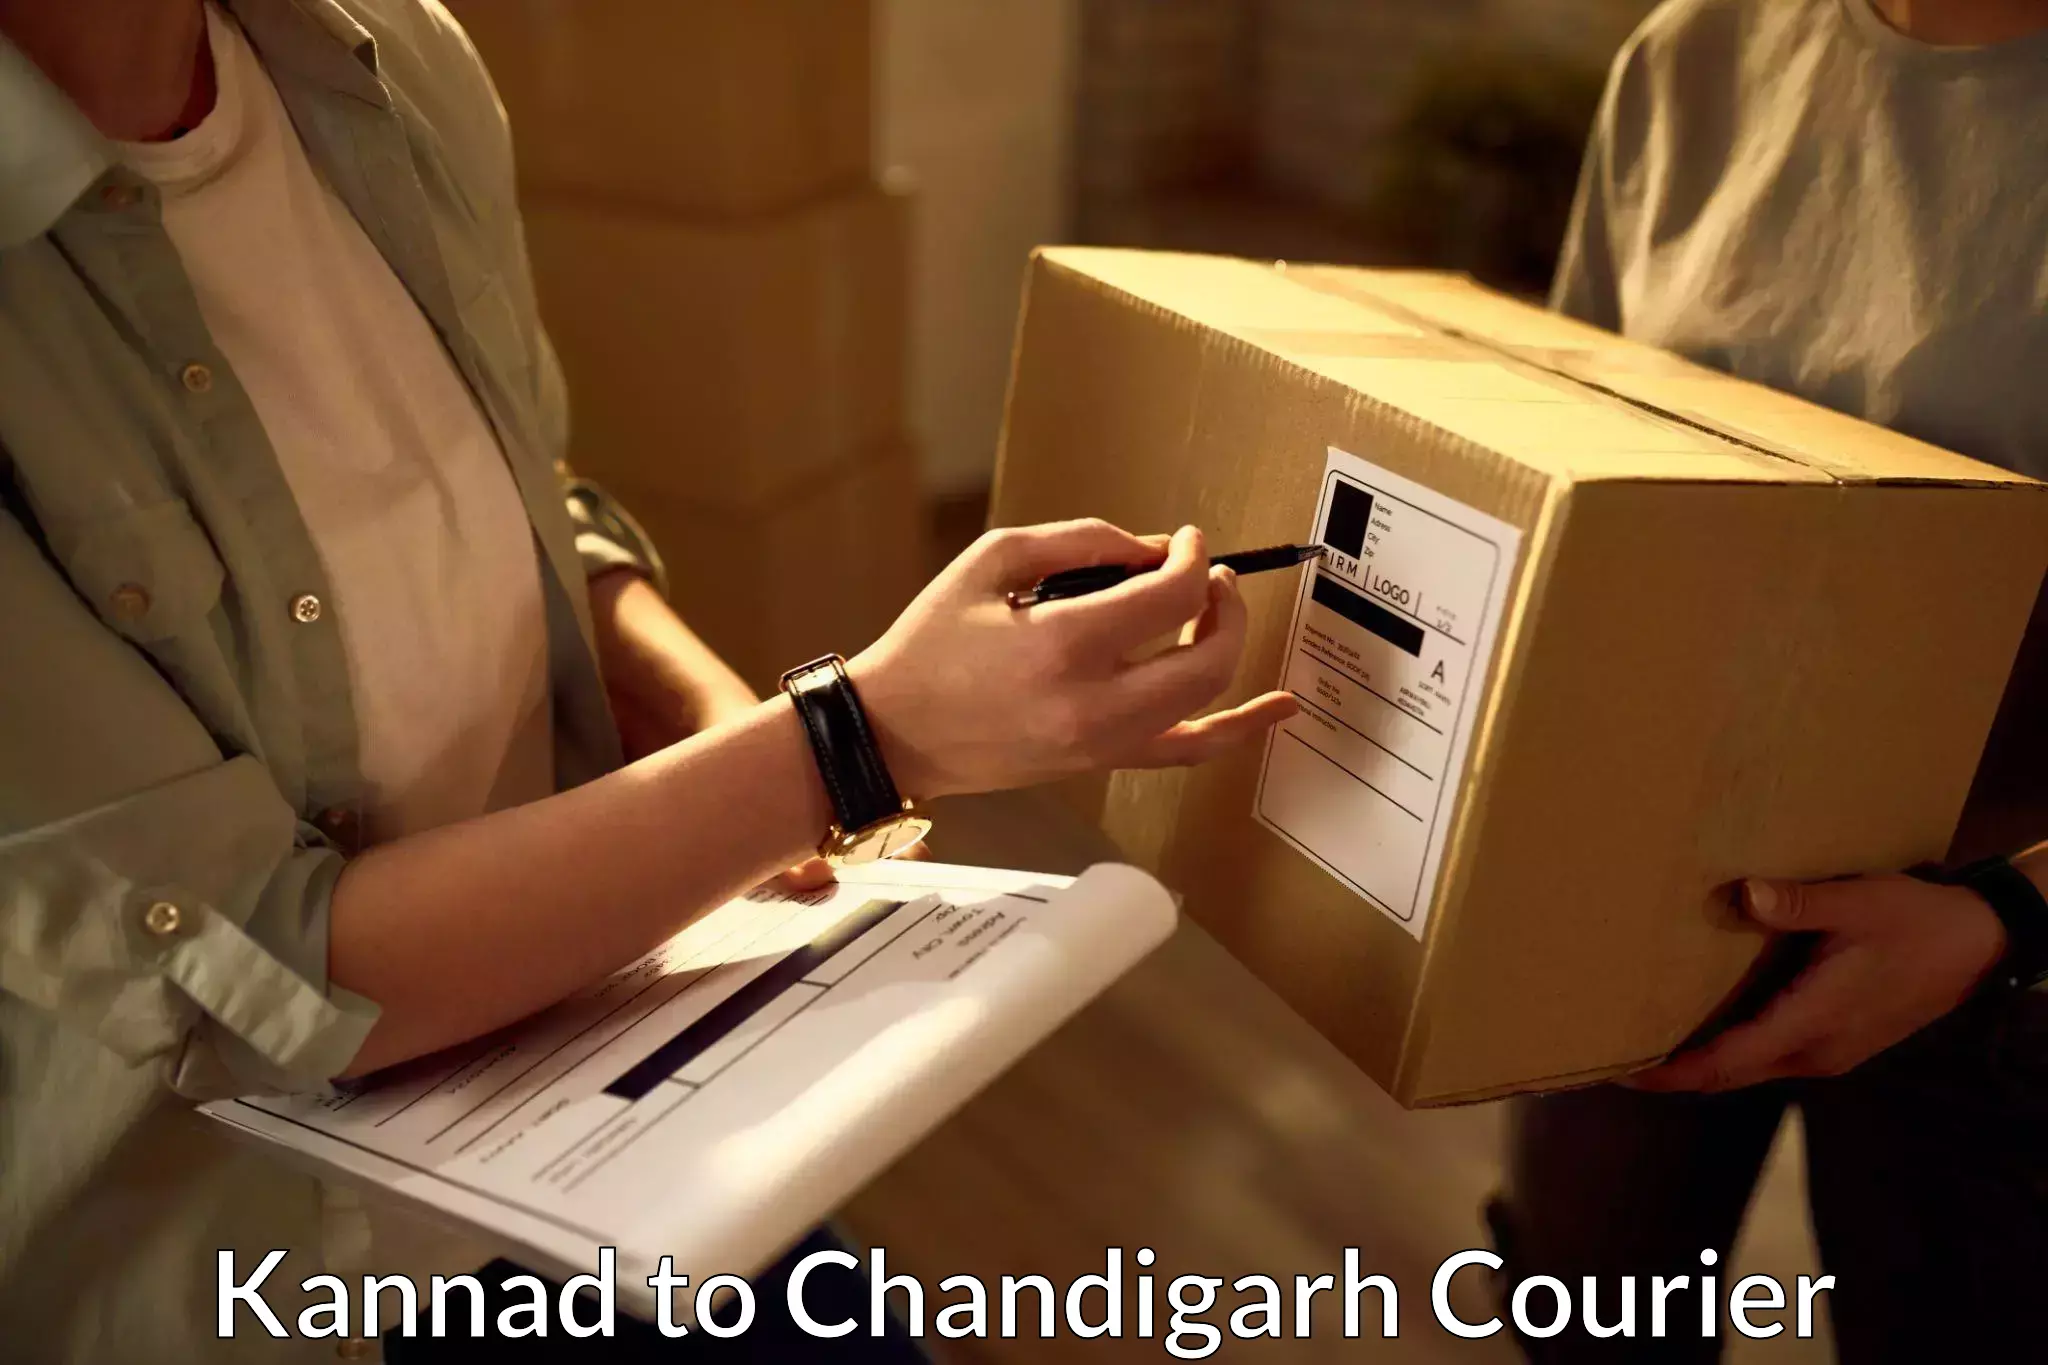 Courier service booking Kannad to Chandigarh